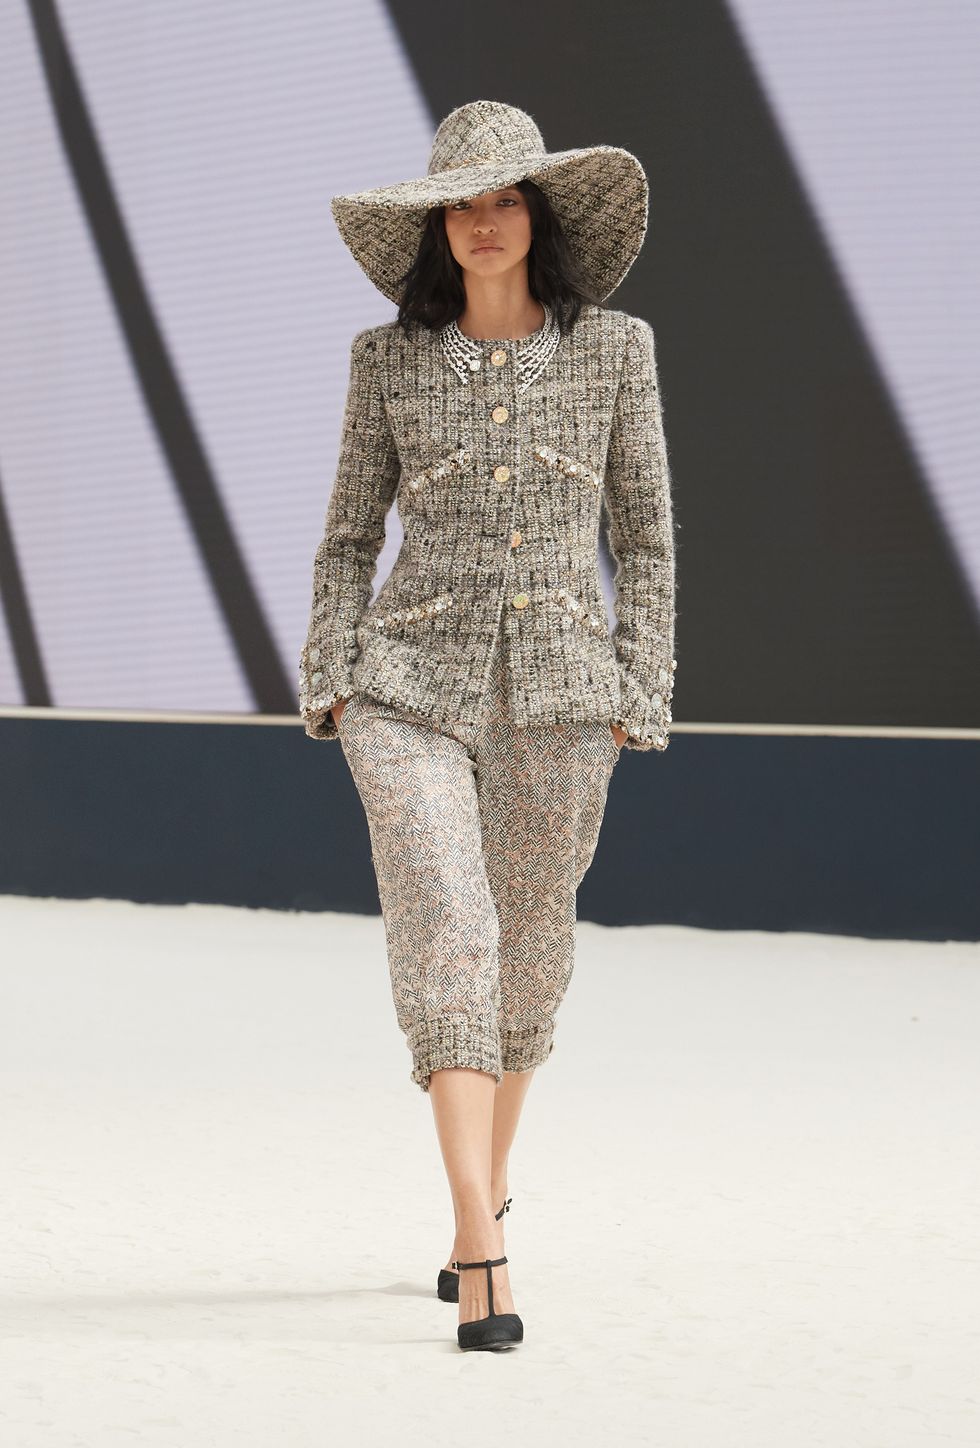 Chanel Haute Couture SS22 collection review